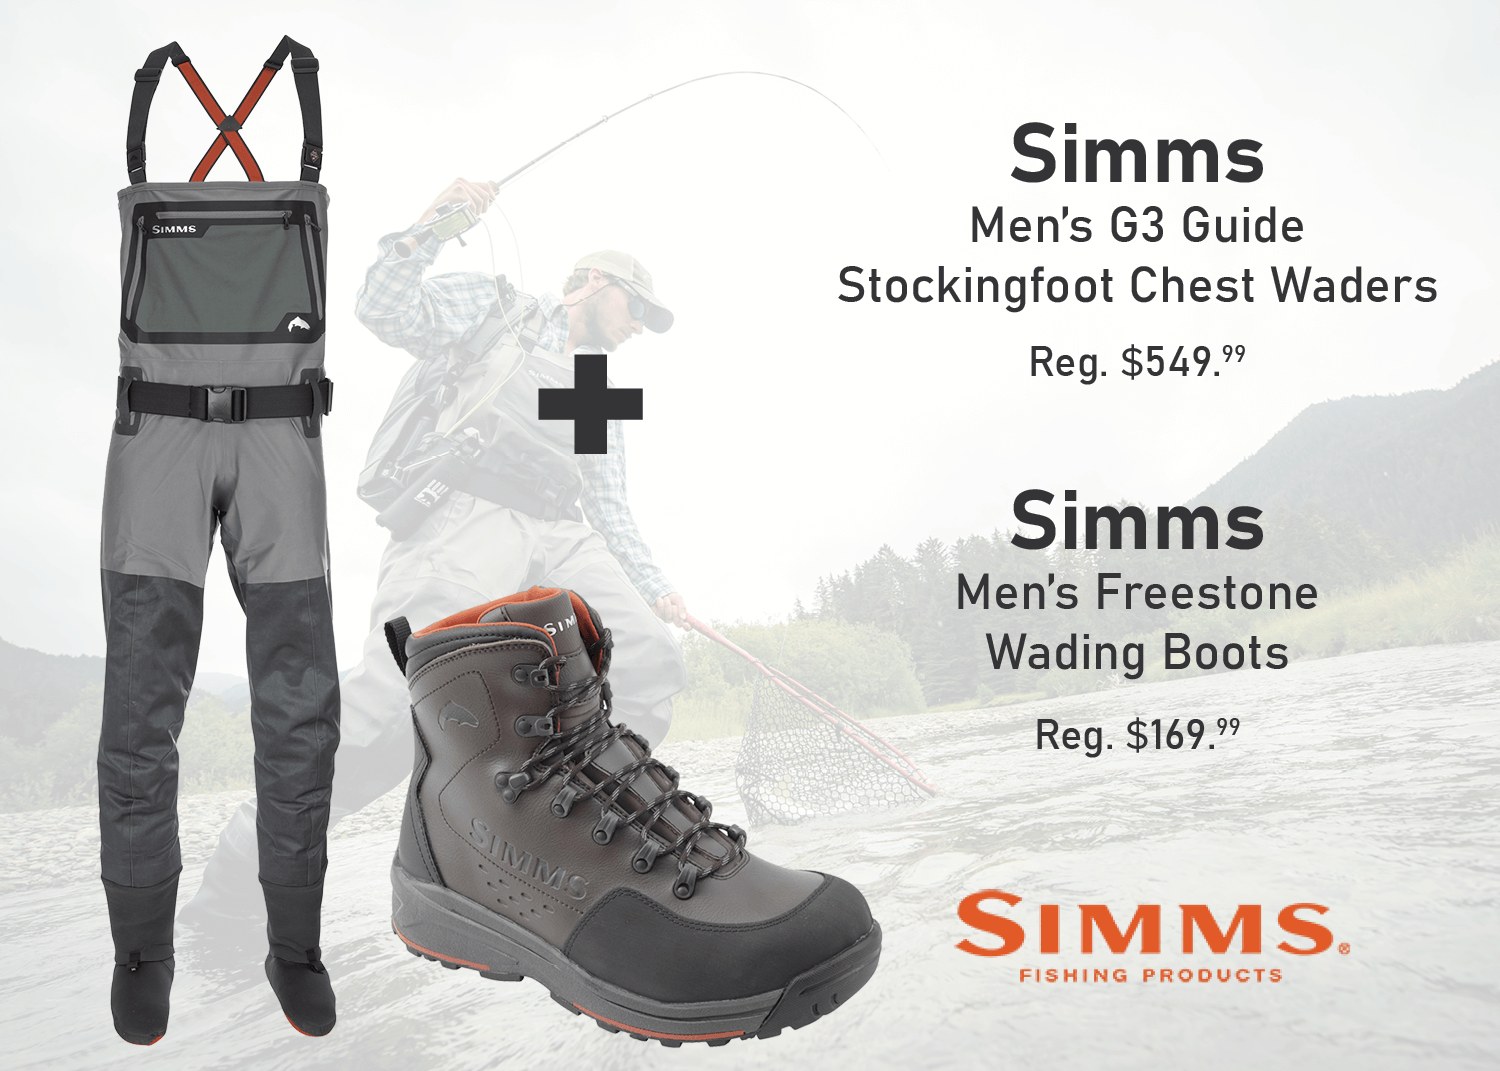 Simms Men's G3 Guide Stockingfoot Chest Waders + Simms Men's Freestone Wading Boots